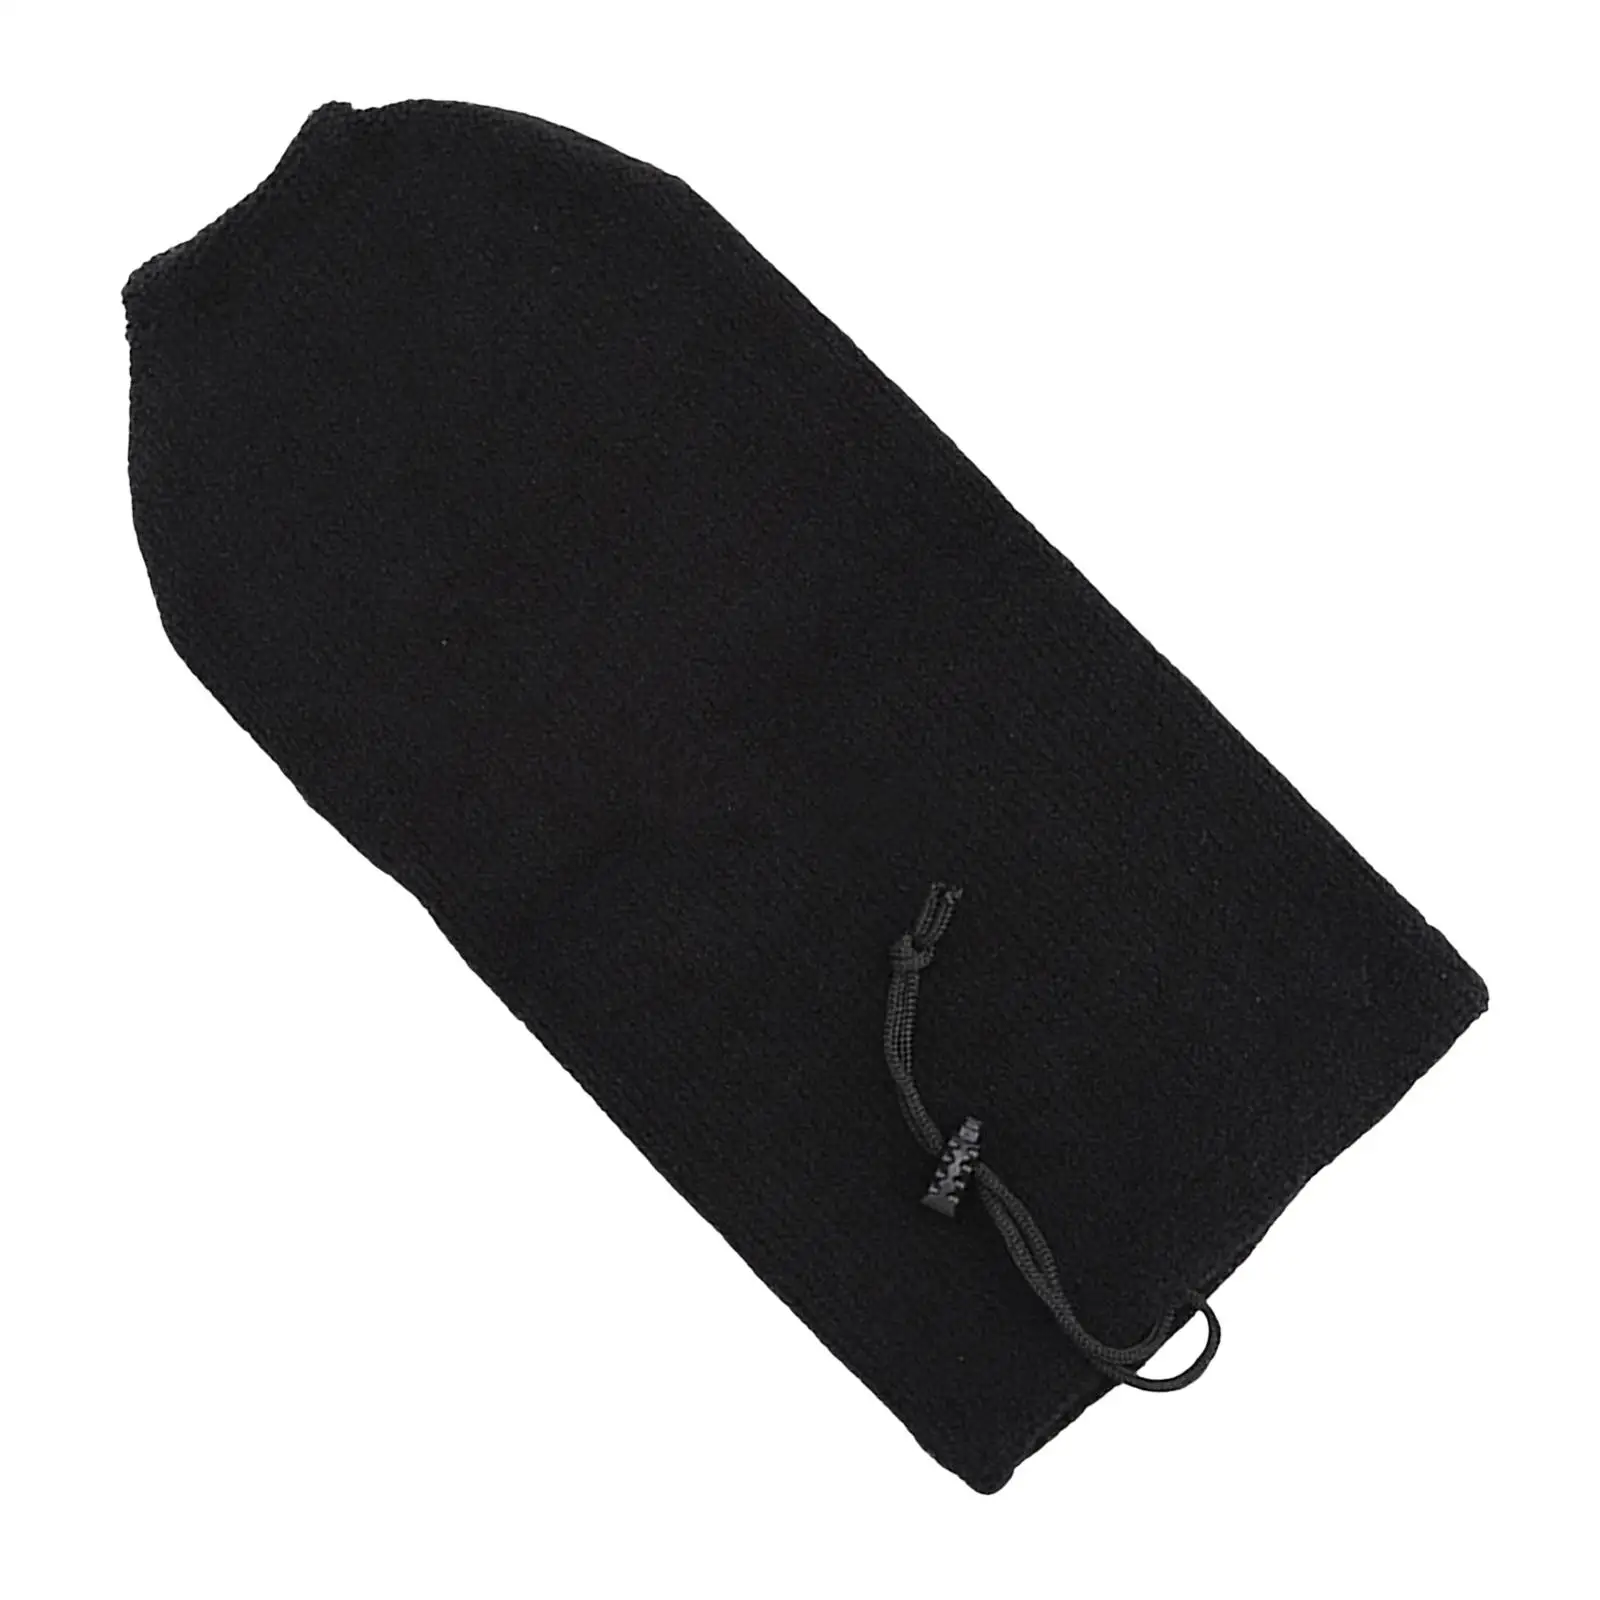 Boat Cover Protective Sleeve, with Tighten Drawstring, Easy to Use Accessories Protector Marine Cover for Marine Sailing